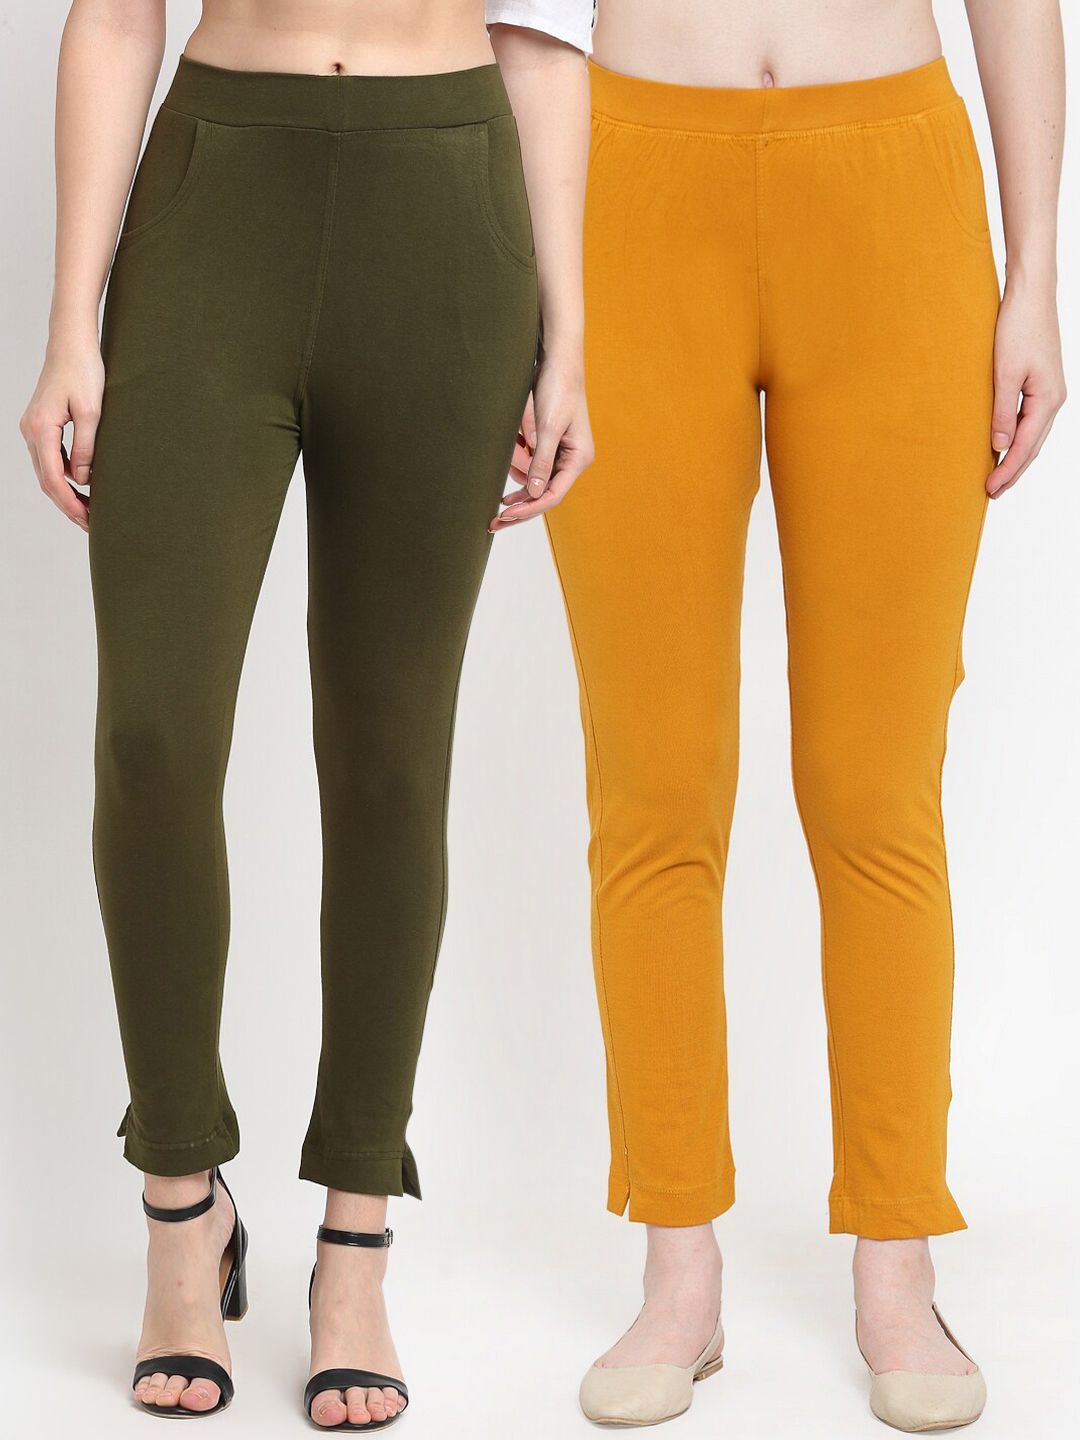 TAG 7 Women Olive Green & Mustard Yellow Pack of 2 Leggings Price in India